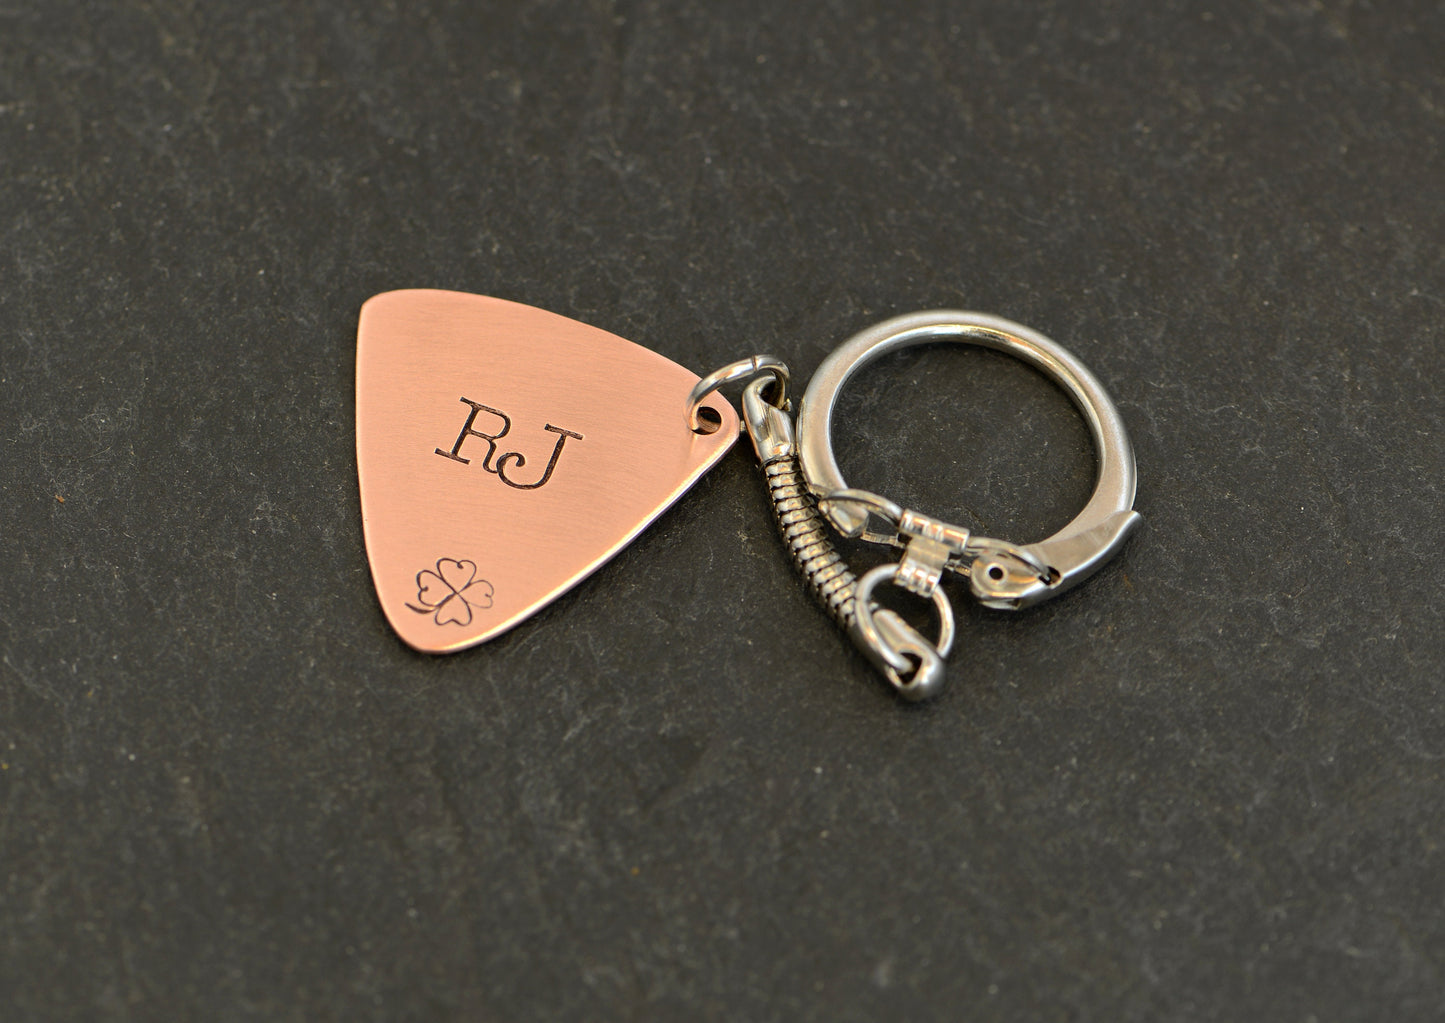 Personalized initials lottery ticket scratcher in copper